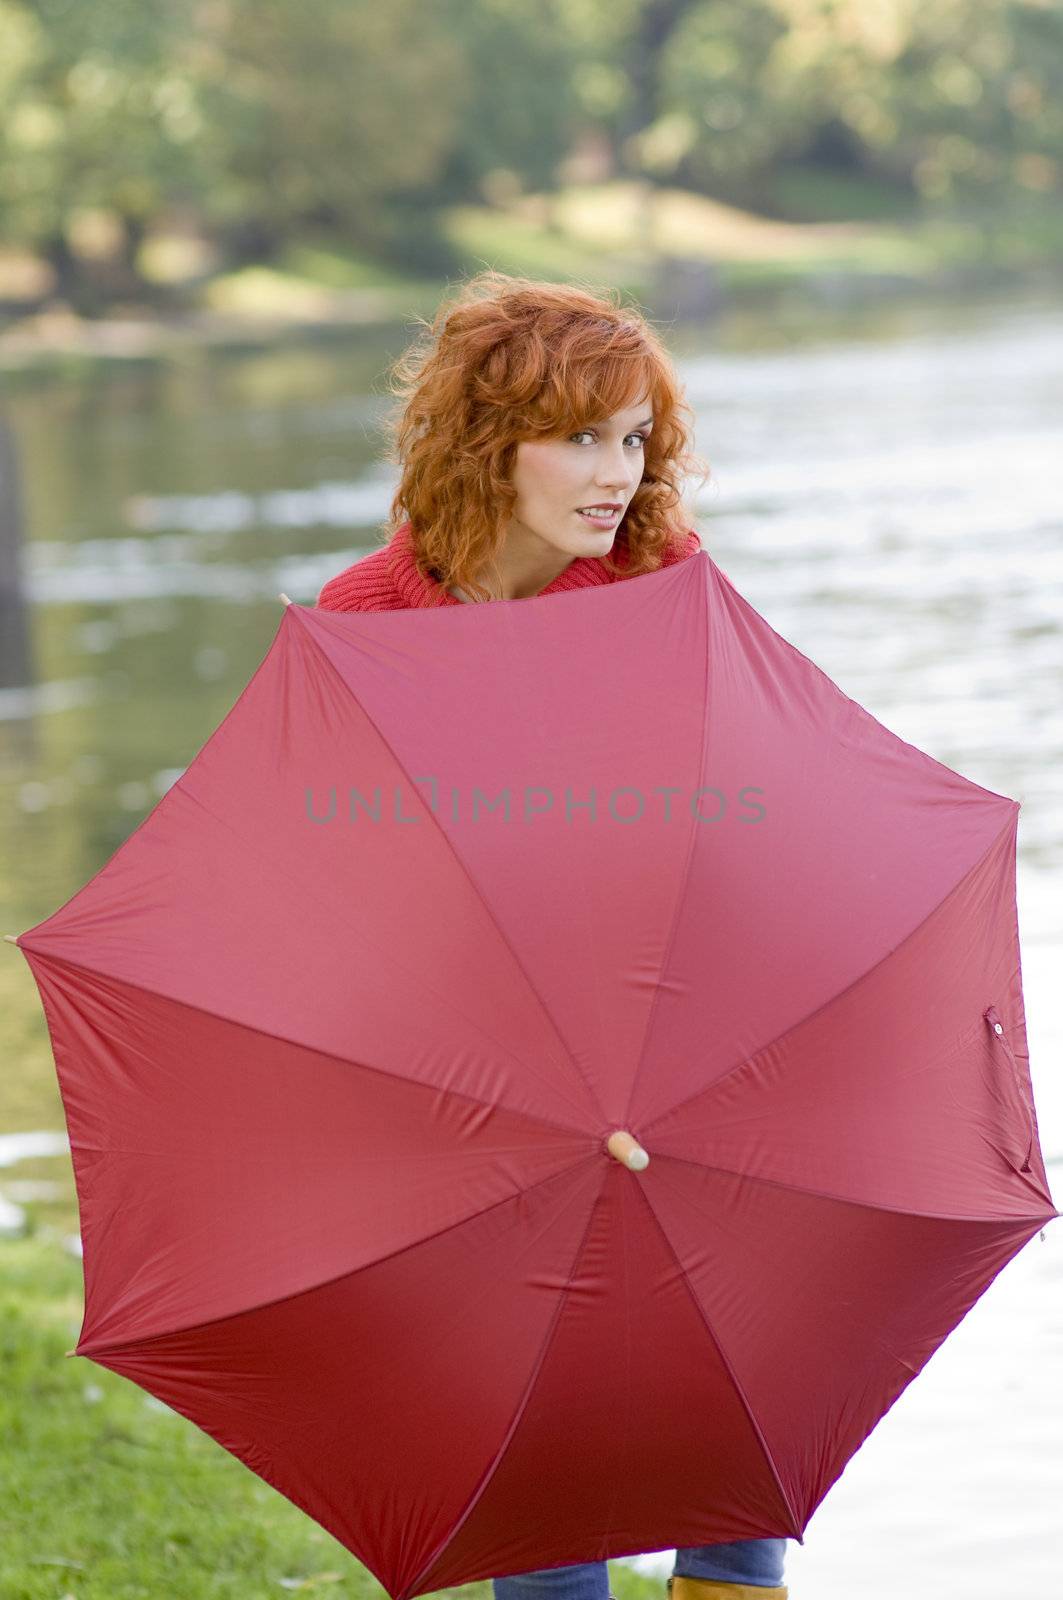 Pretty red haired girl near river playing behind a red umbrella